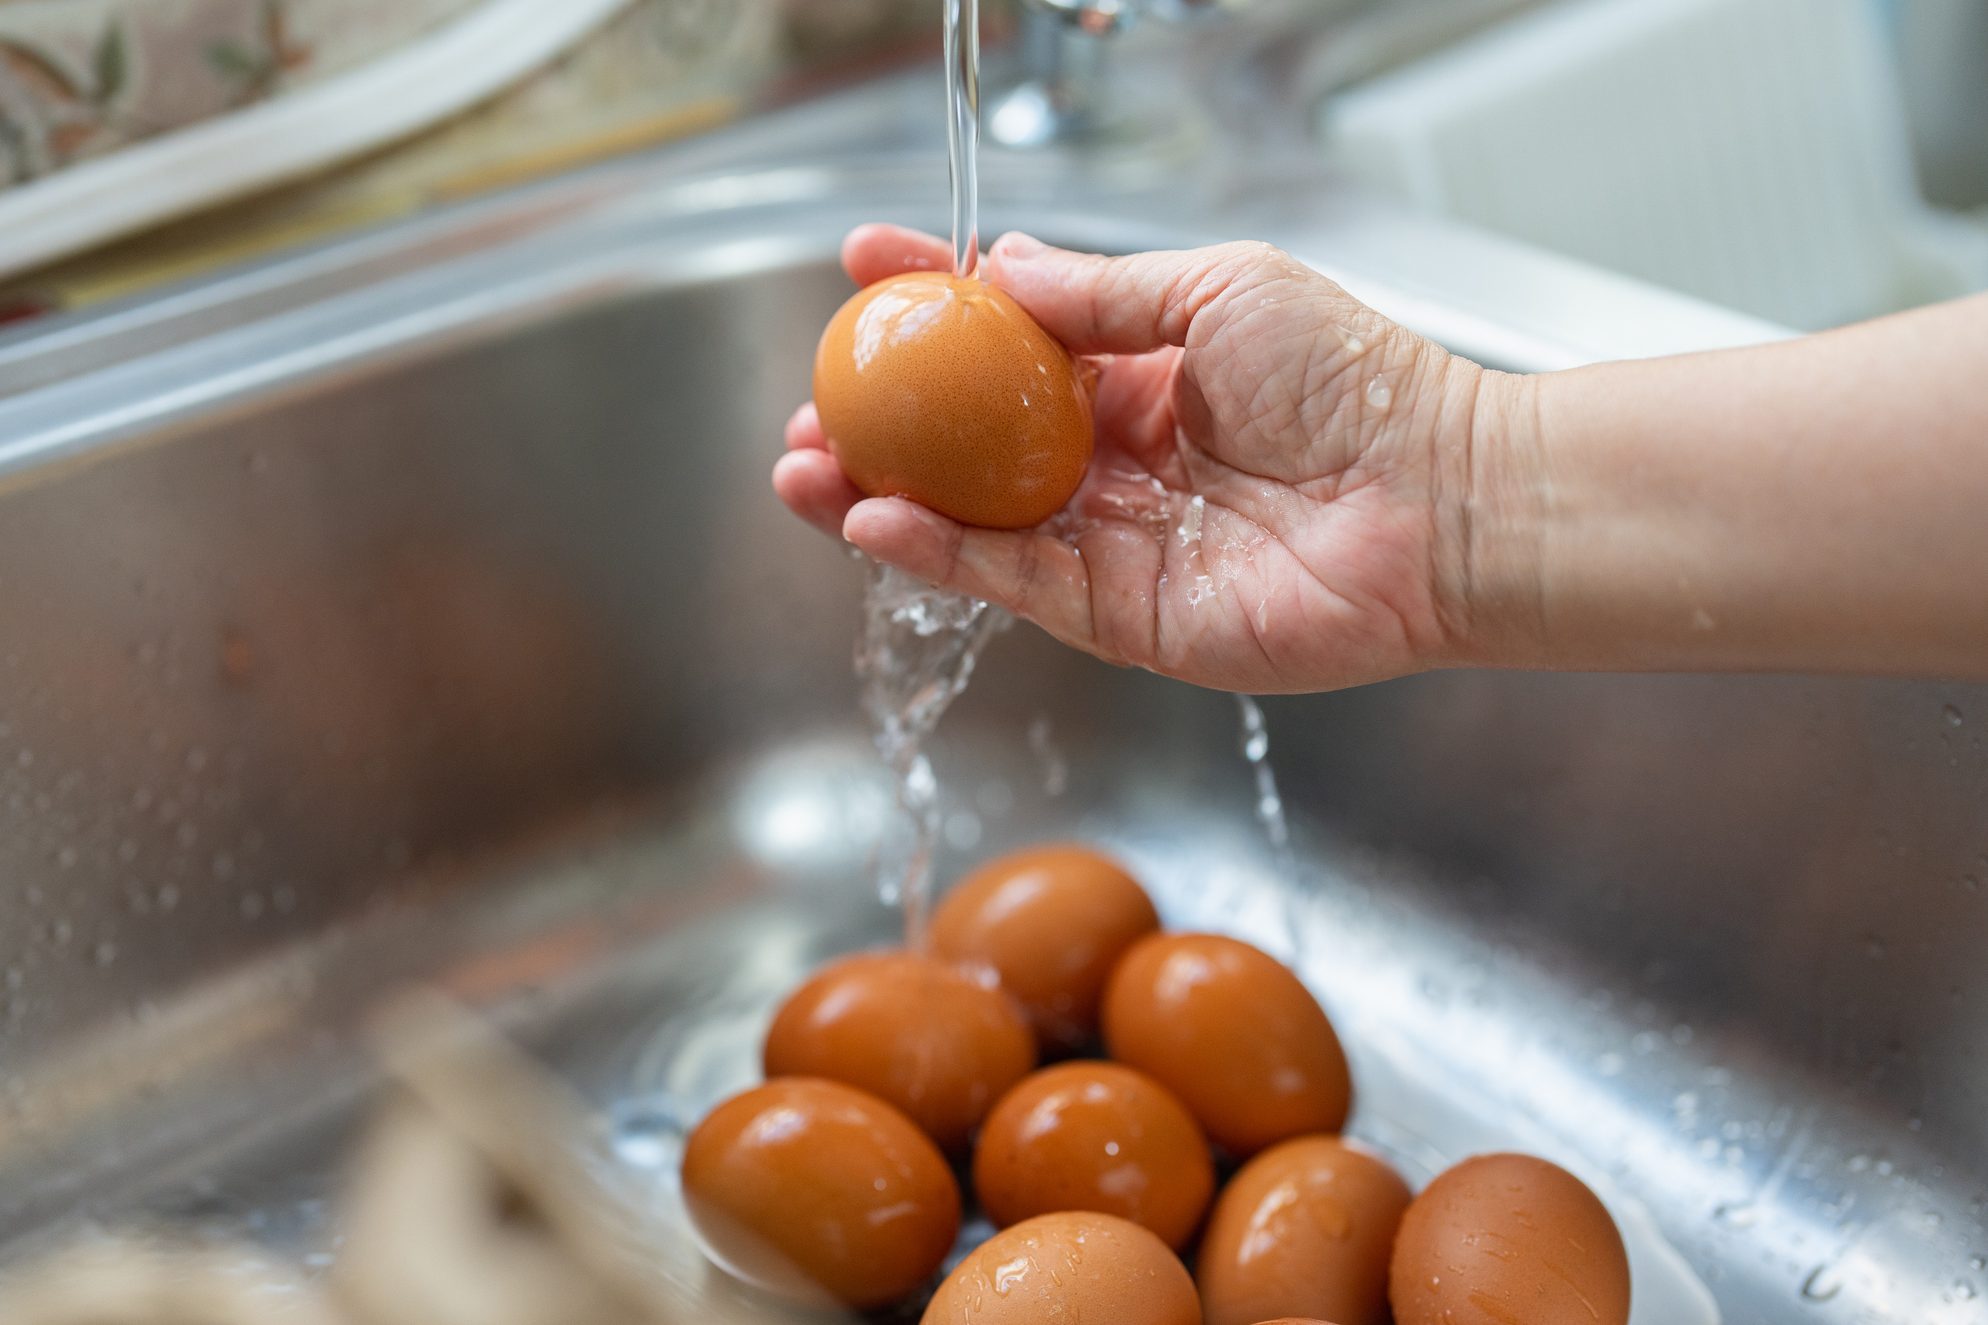 Saving My Hands With an Industrial Egg Washer 